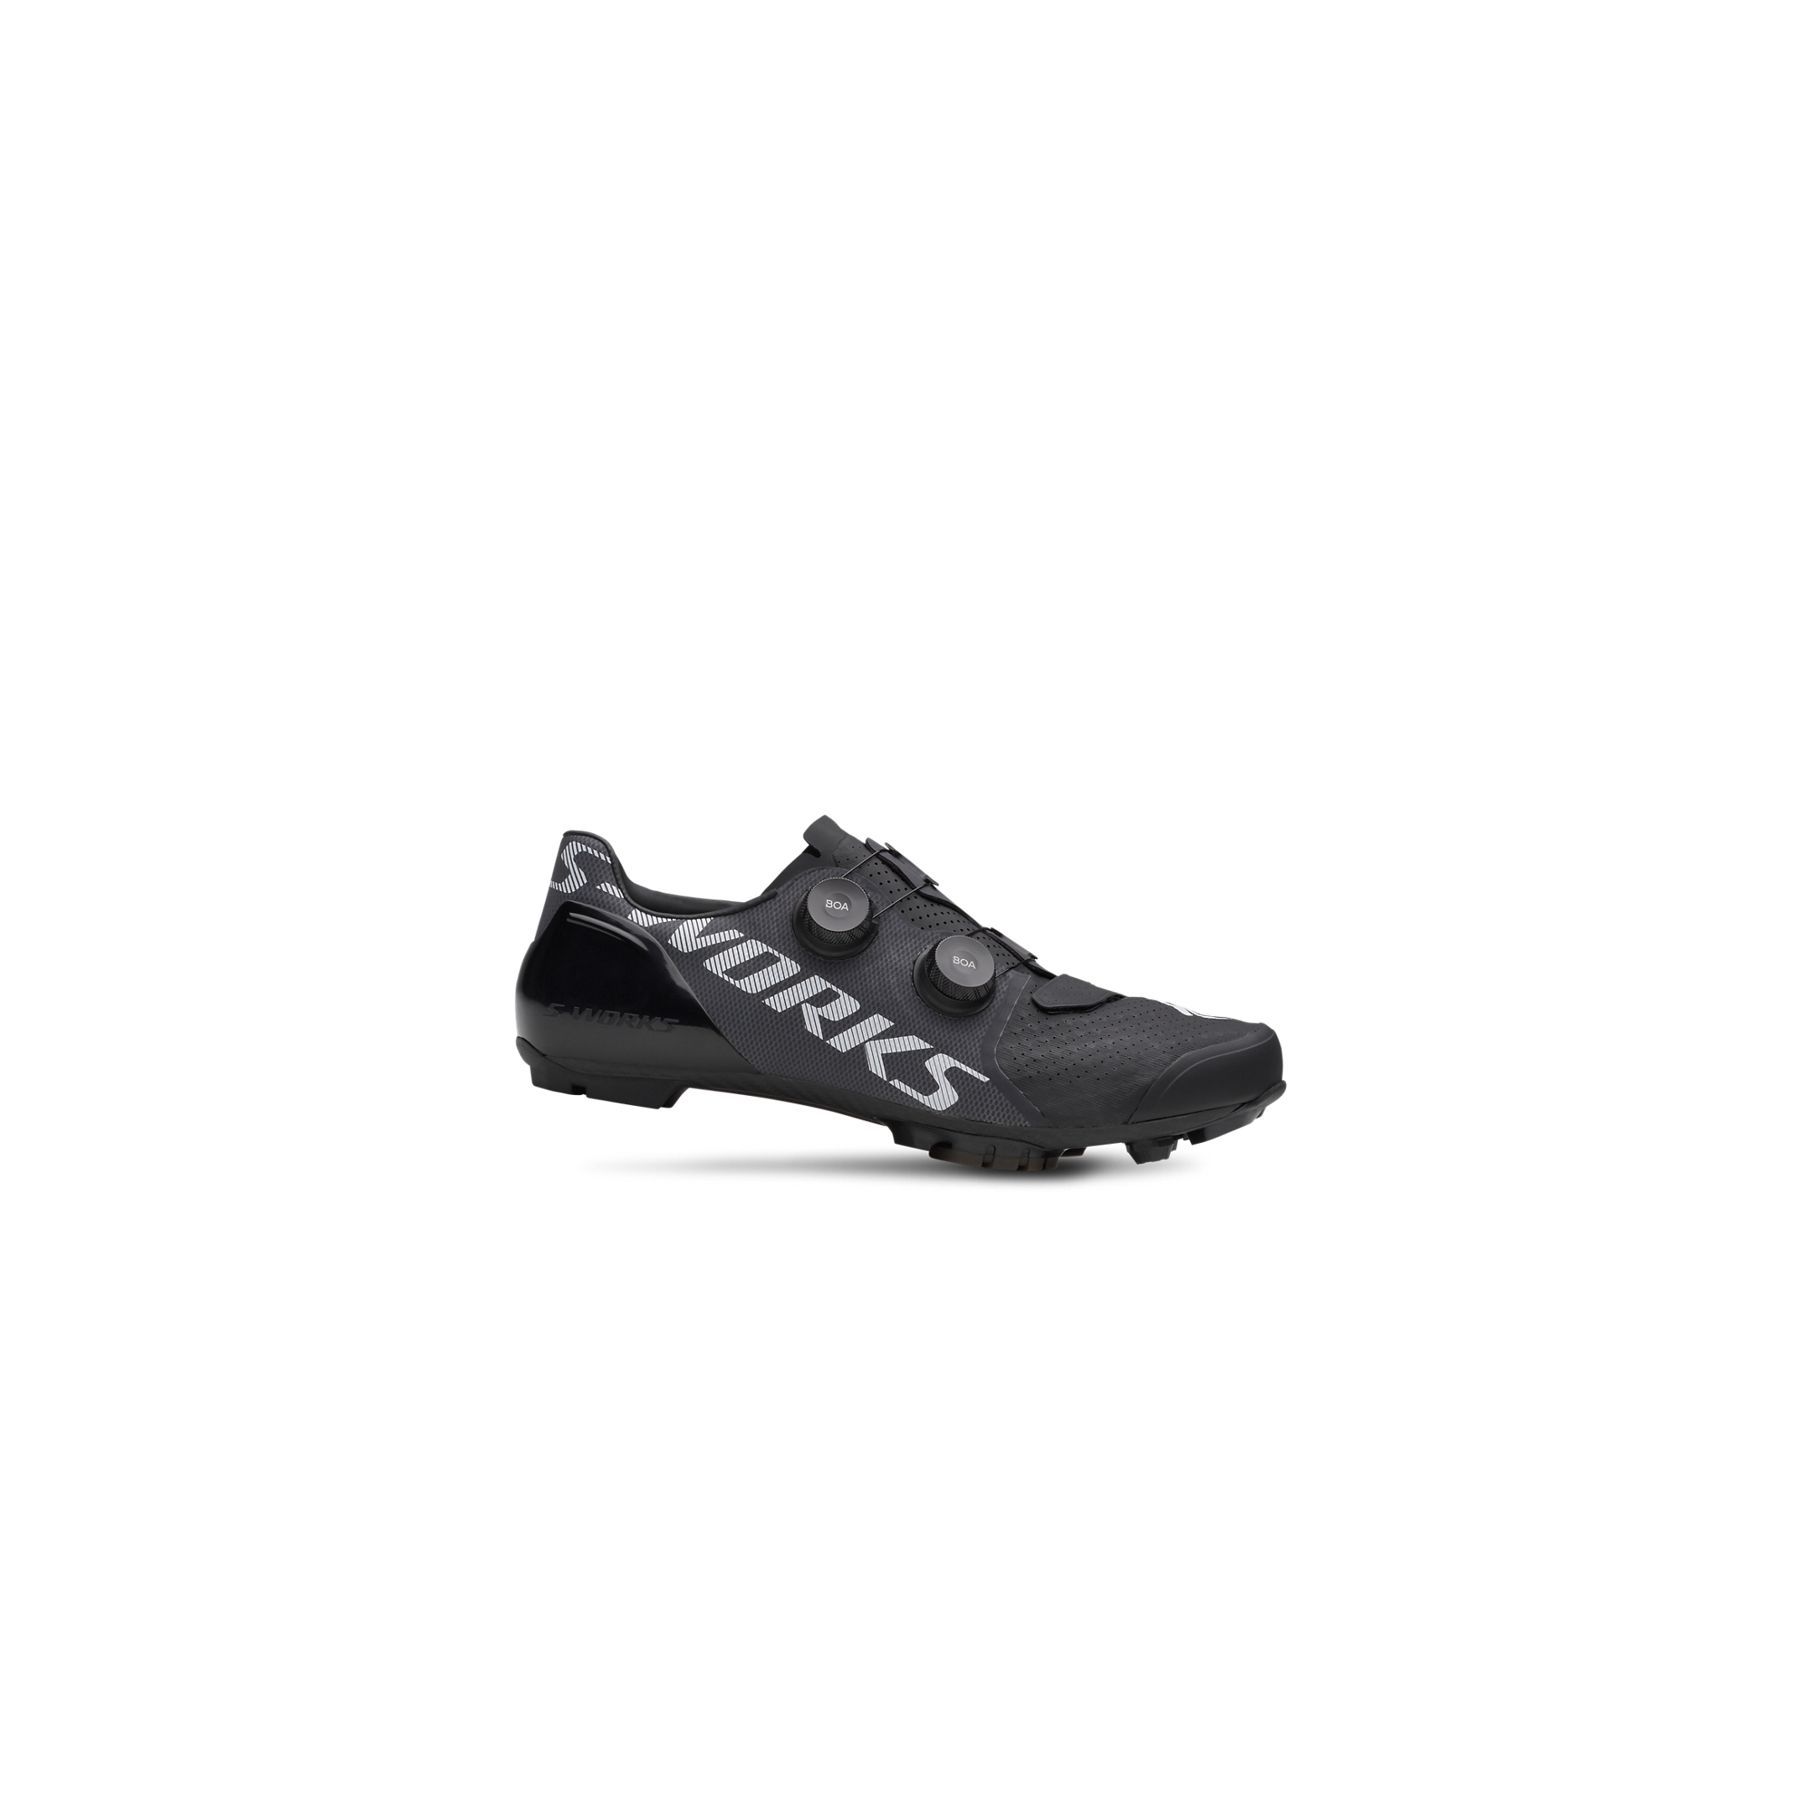 cycling shoes pedals and cleats